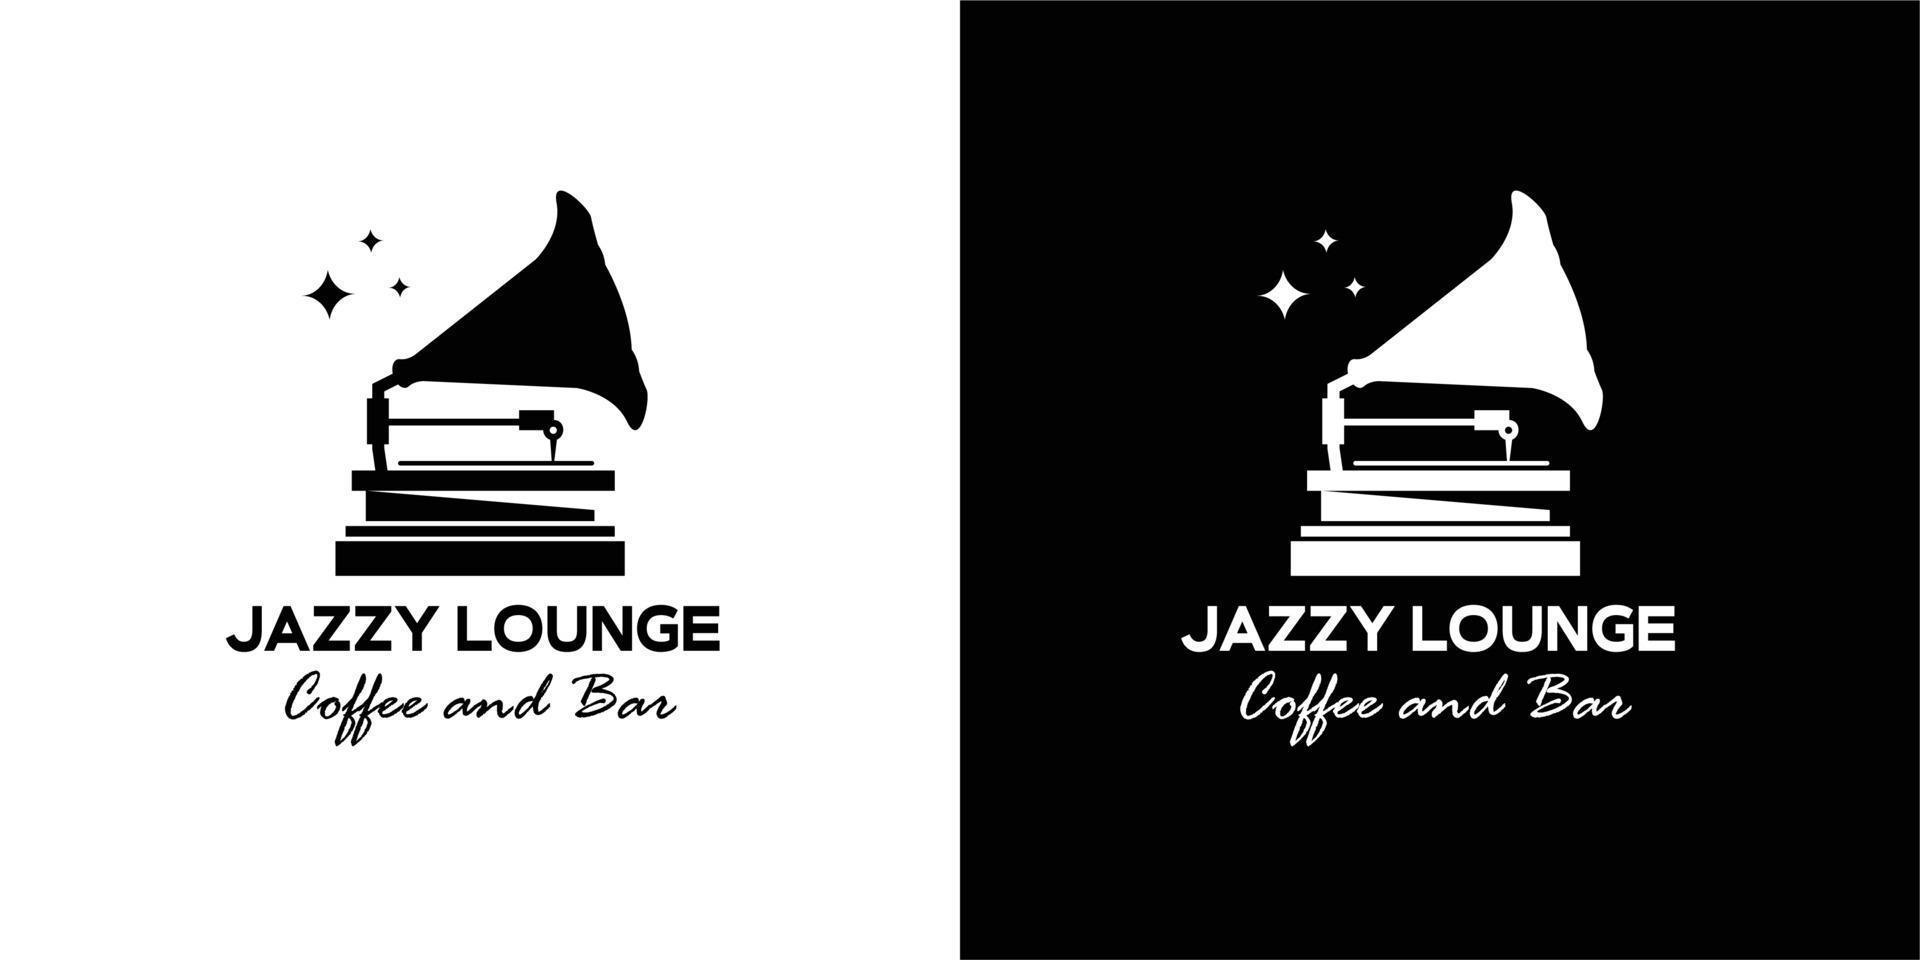 ILLUSTRATION VECTOR GRAPHIC OF BLACK SILHOUETTE GRAMOPHONE CLASSIC OLD VINTAGE GOOD FOR JAZZ JAZZY LOUNGE COFFEE SHOP CAFE AND DRINKING WINE BAR VINTAGE LOGO